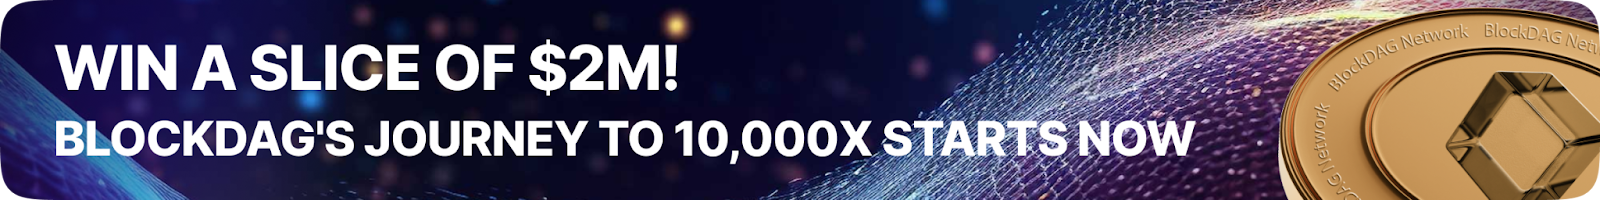 BlockDAG’s $2M Giveaway Steals the Show with Over 80,000 Entries Despite TON & DOGE’s Price Hikes 